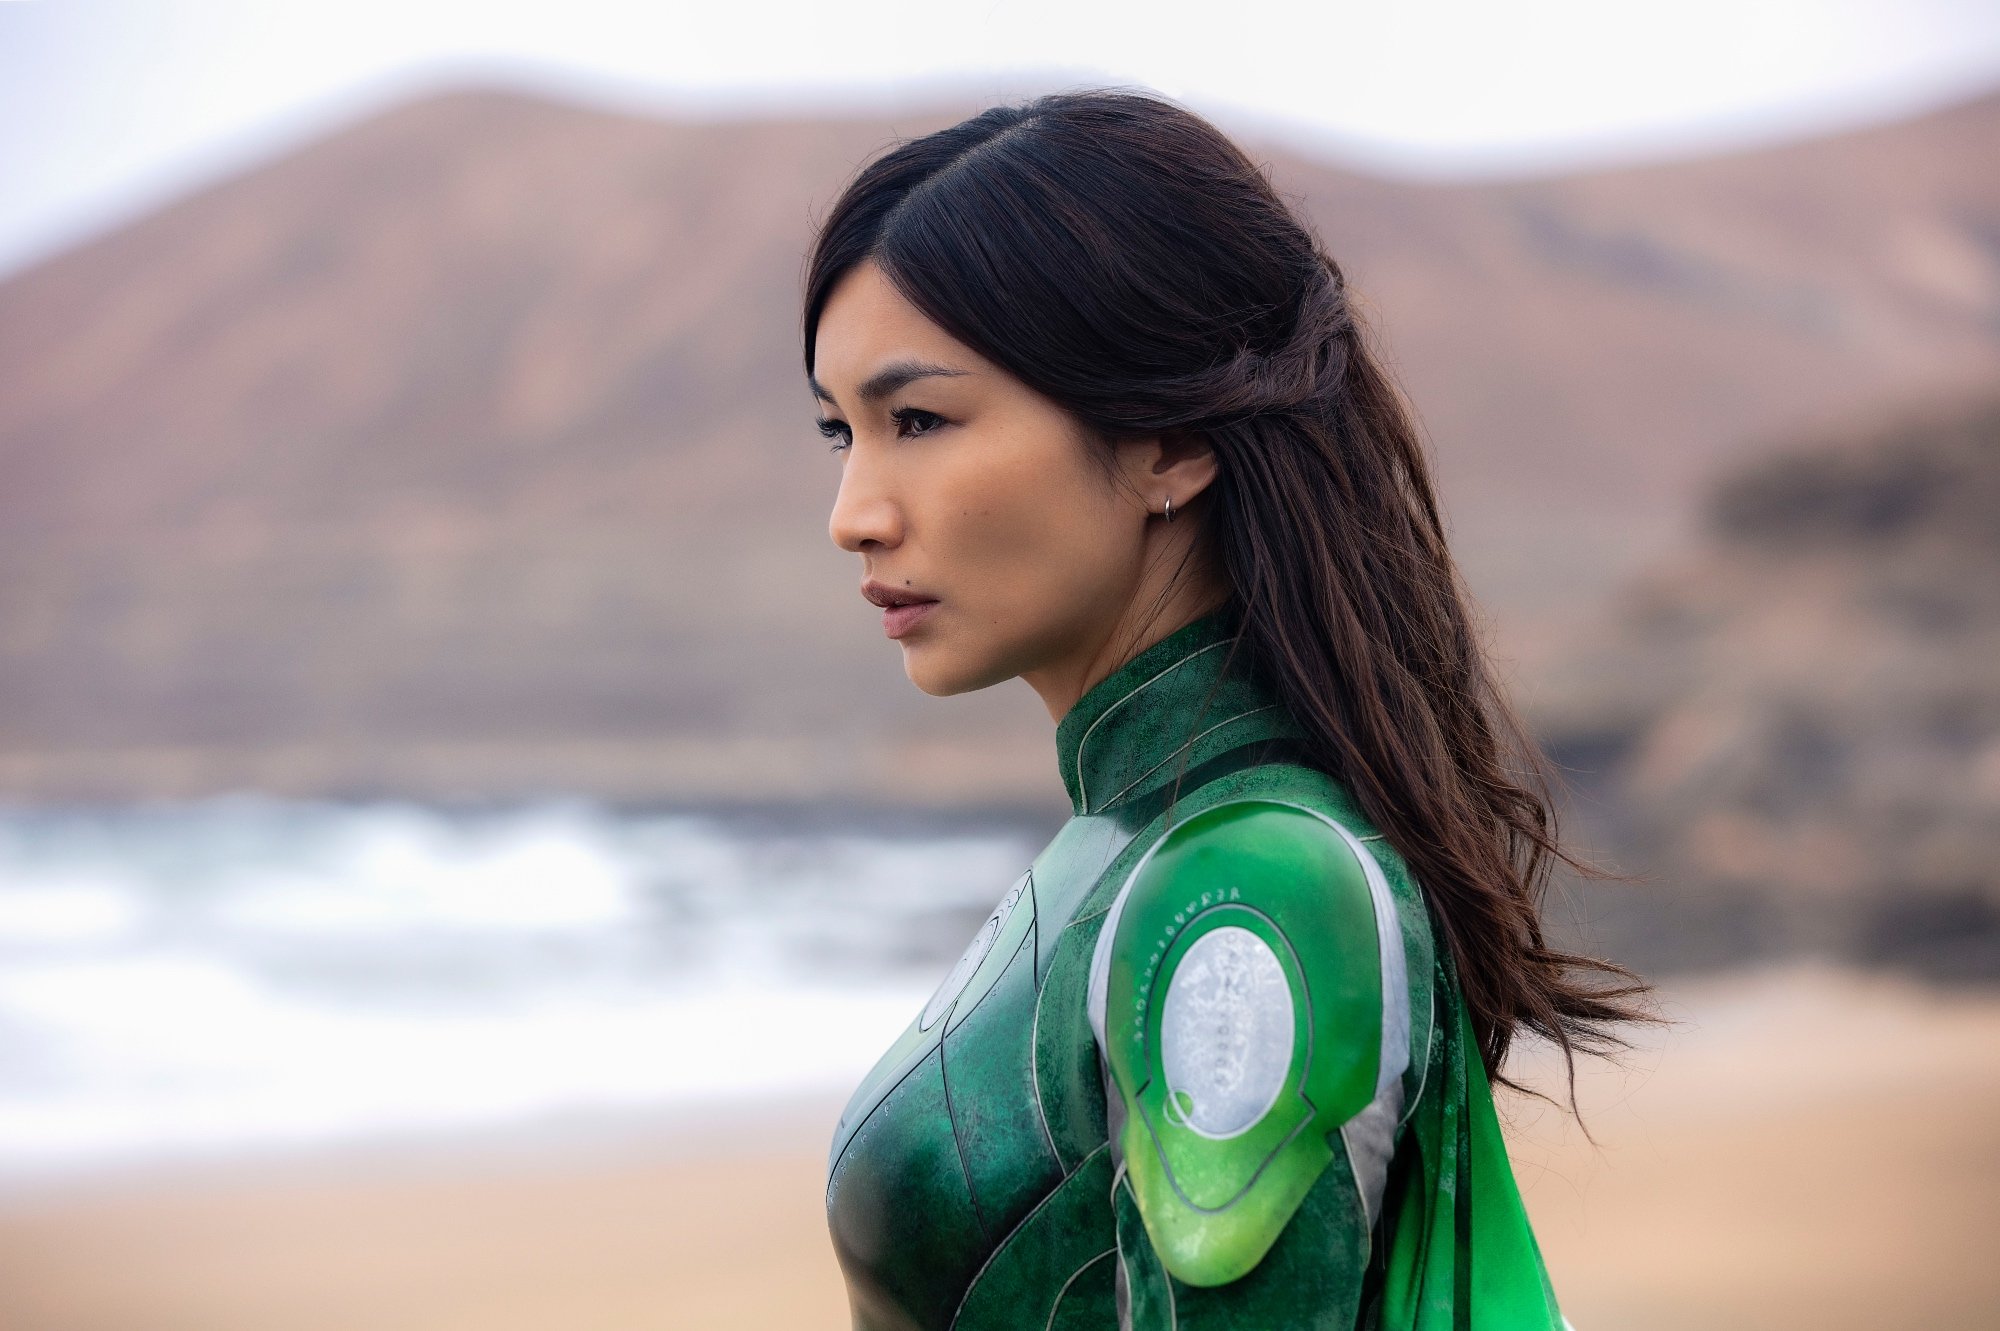 'Eternals' Gemma Chan as Sersi in MCU Phase 4 ranked list. She's wearing a green and silver suit, looking off into the distance on a beach with waves crashing in the background